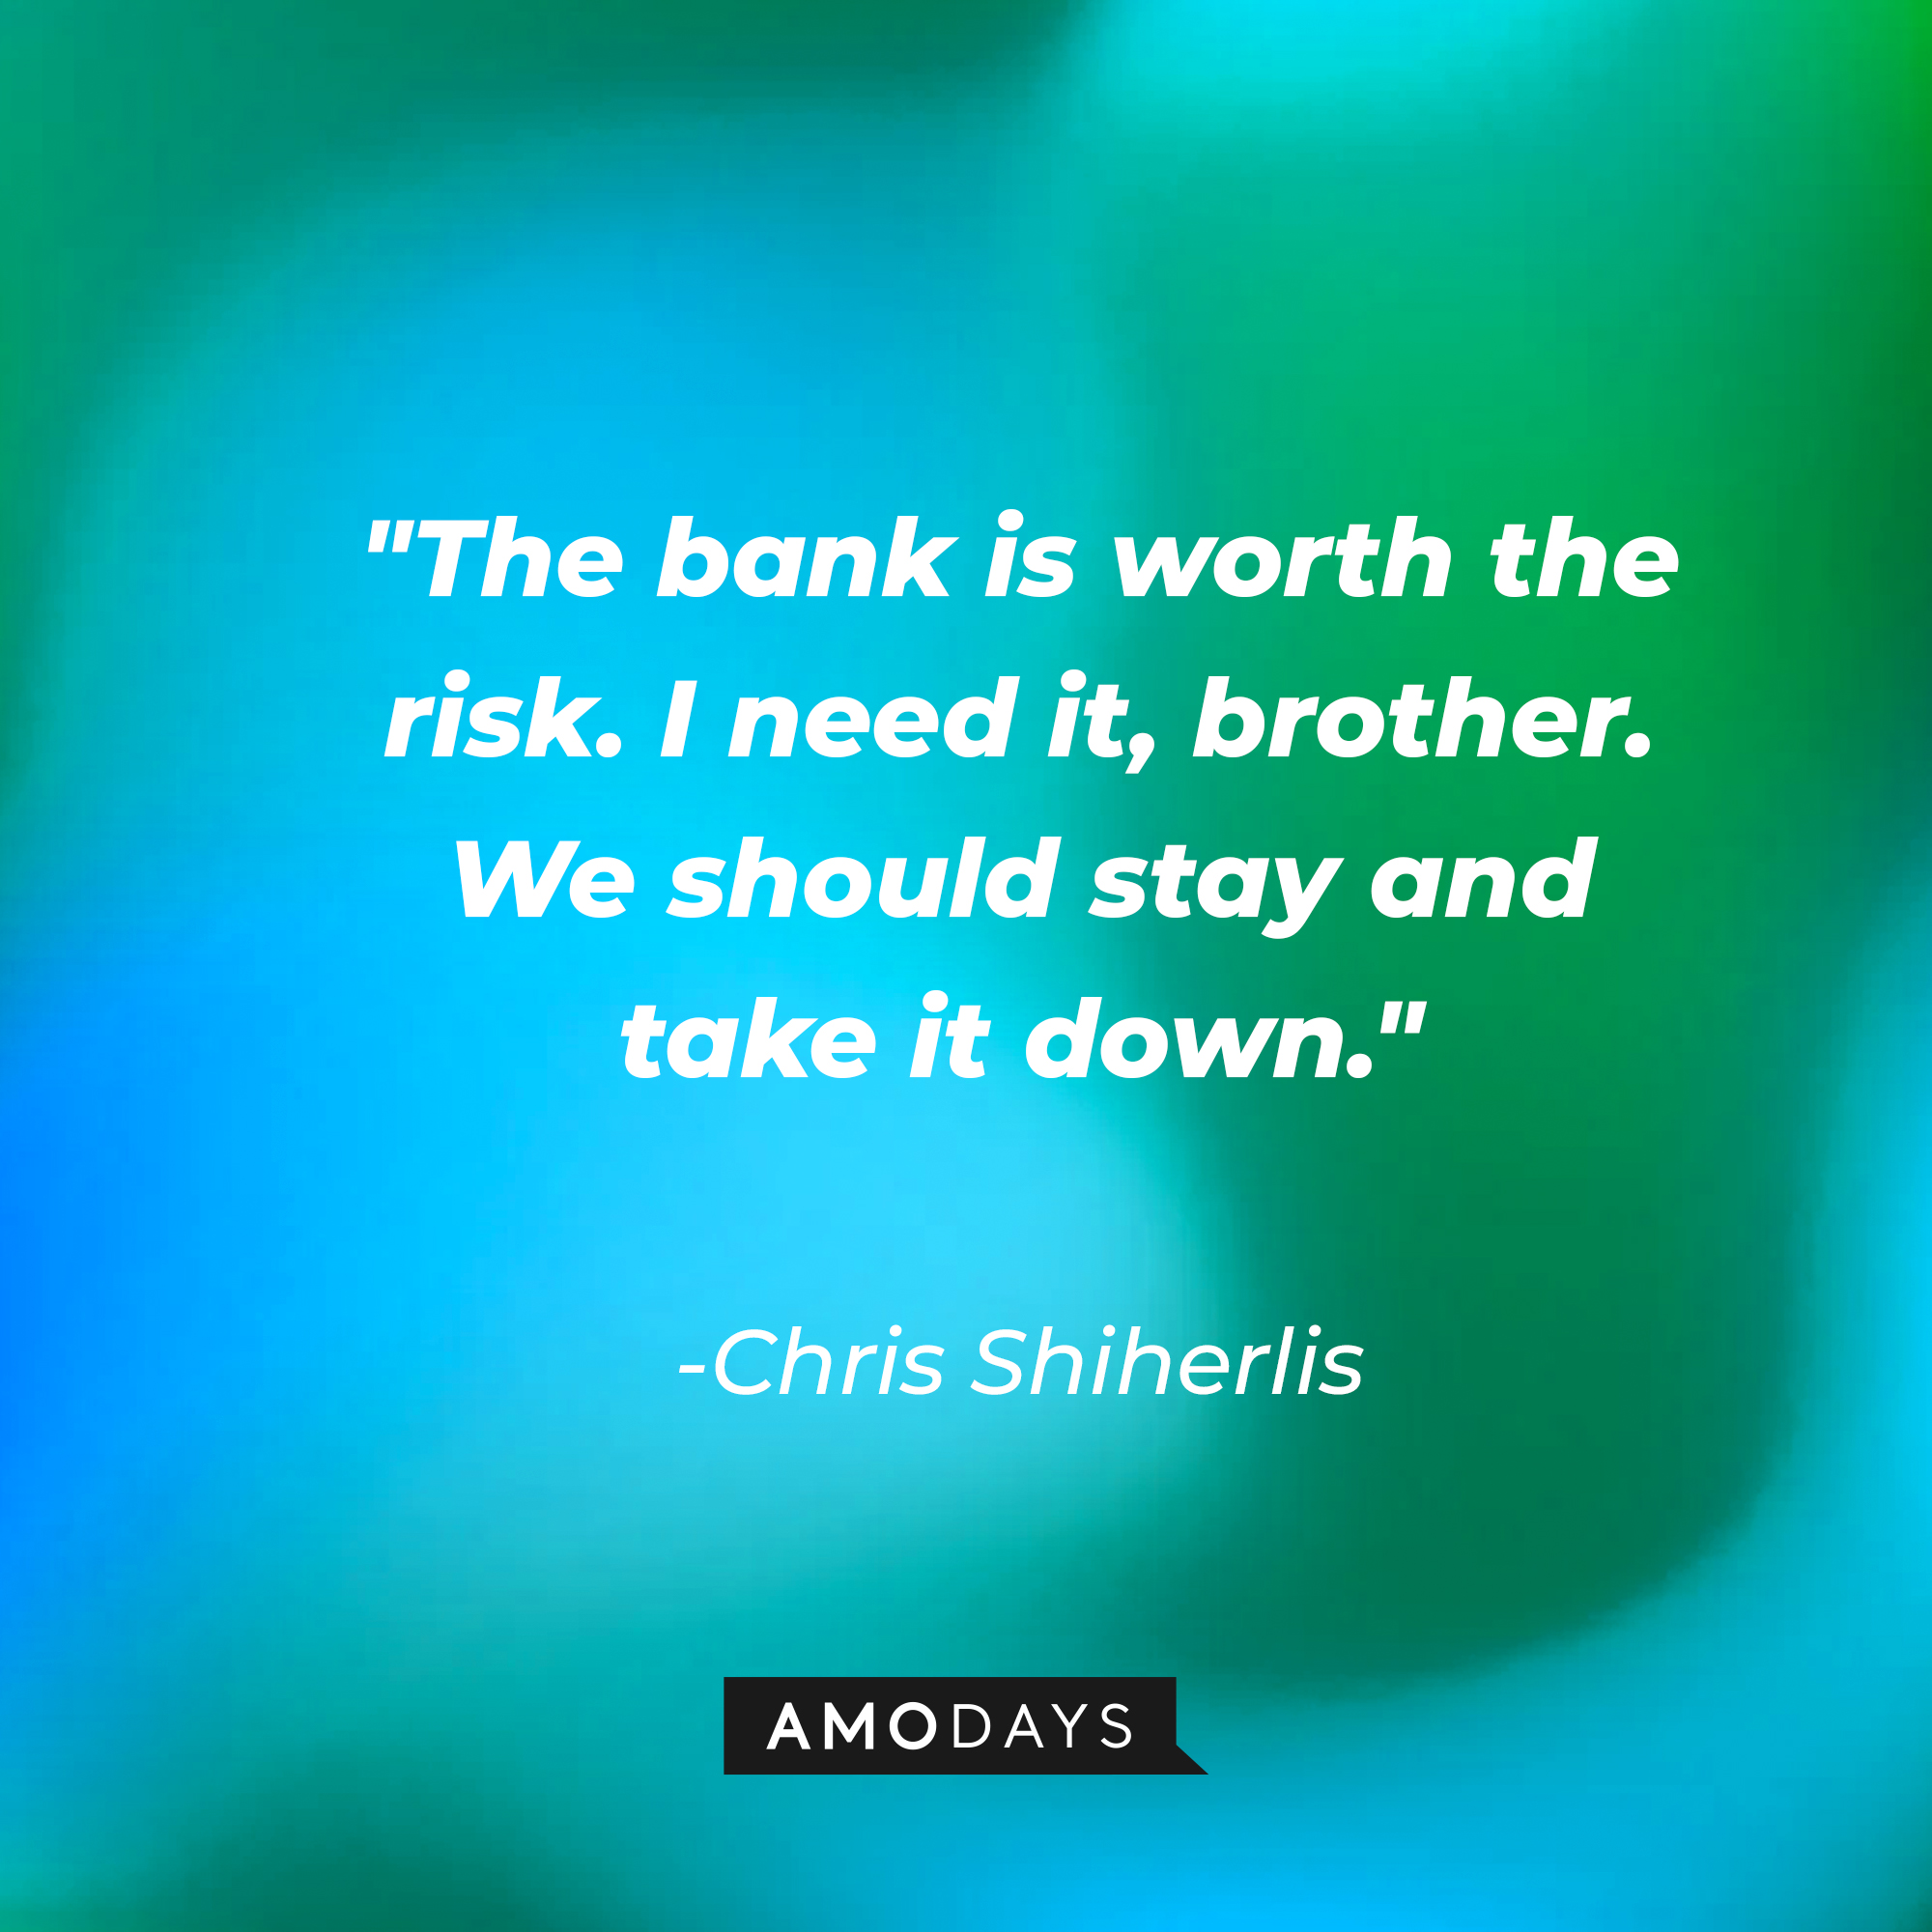 Chris Shiherlis's quote: "The bank is worth the risk. I need it, brother. We should stay and take it down." | Source: AmoDays